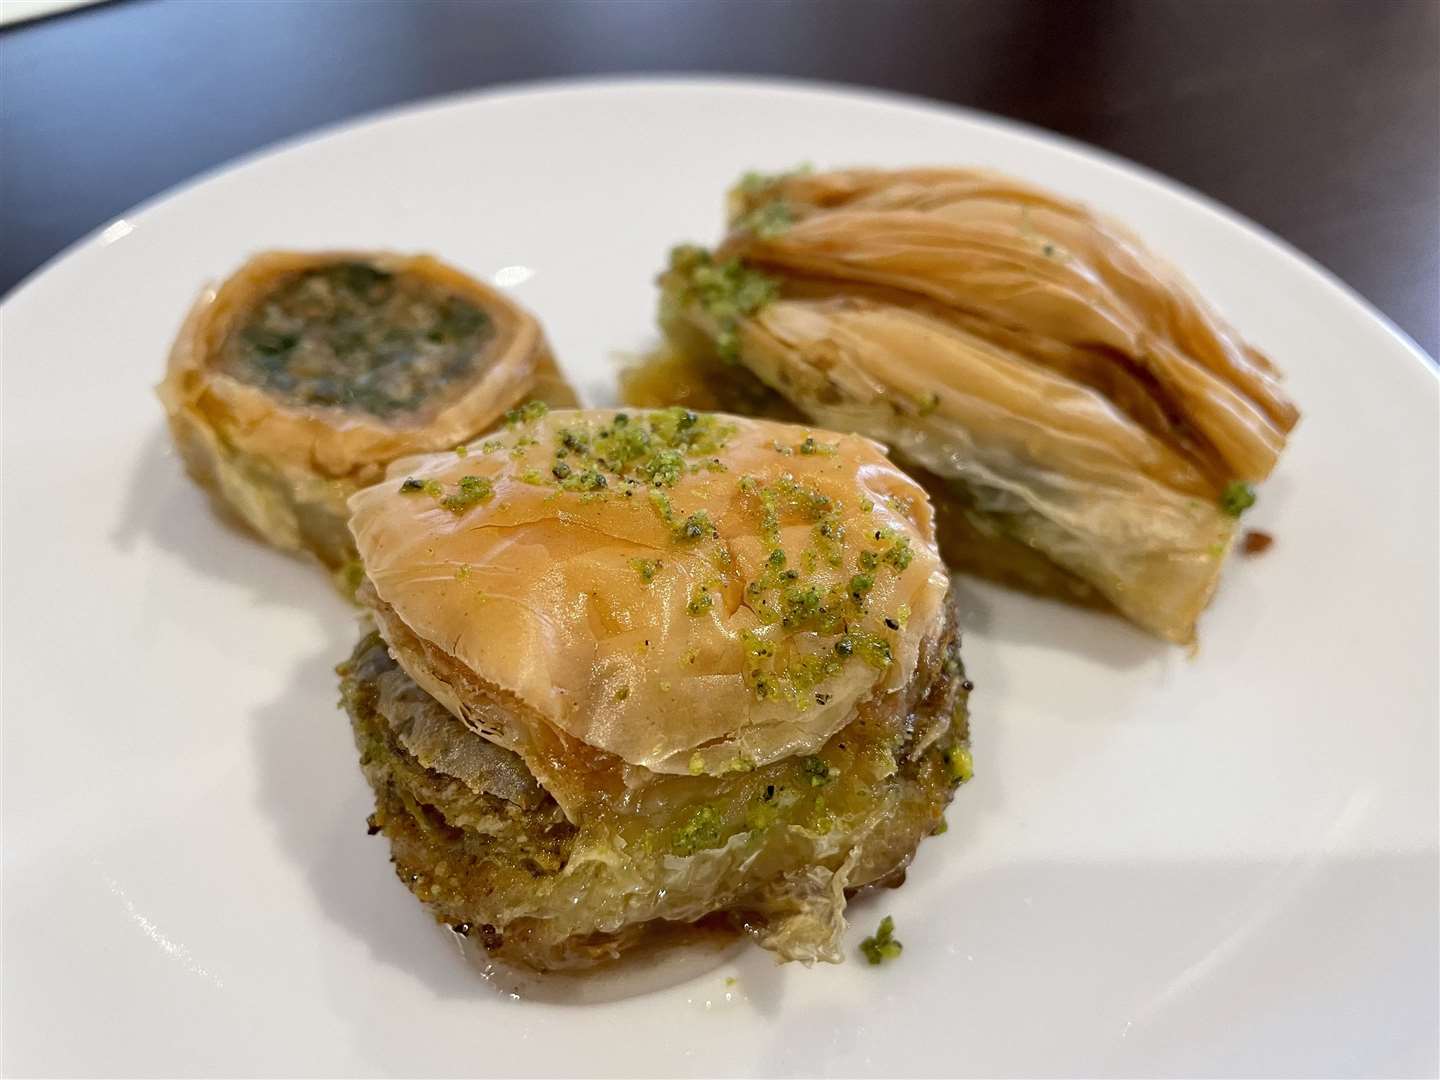 The cafe offers a range of Baklava